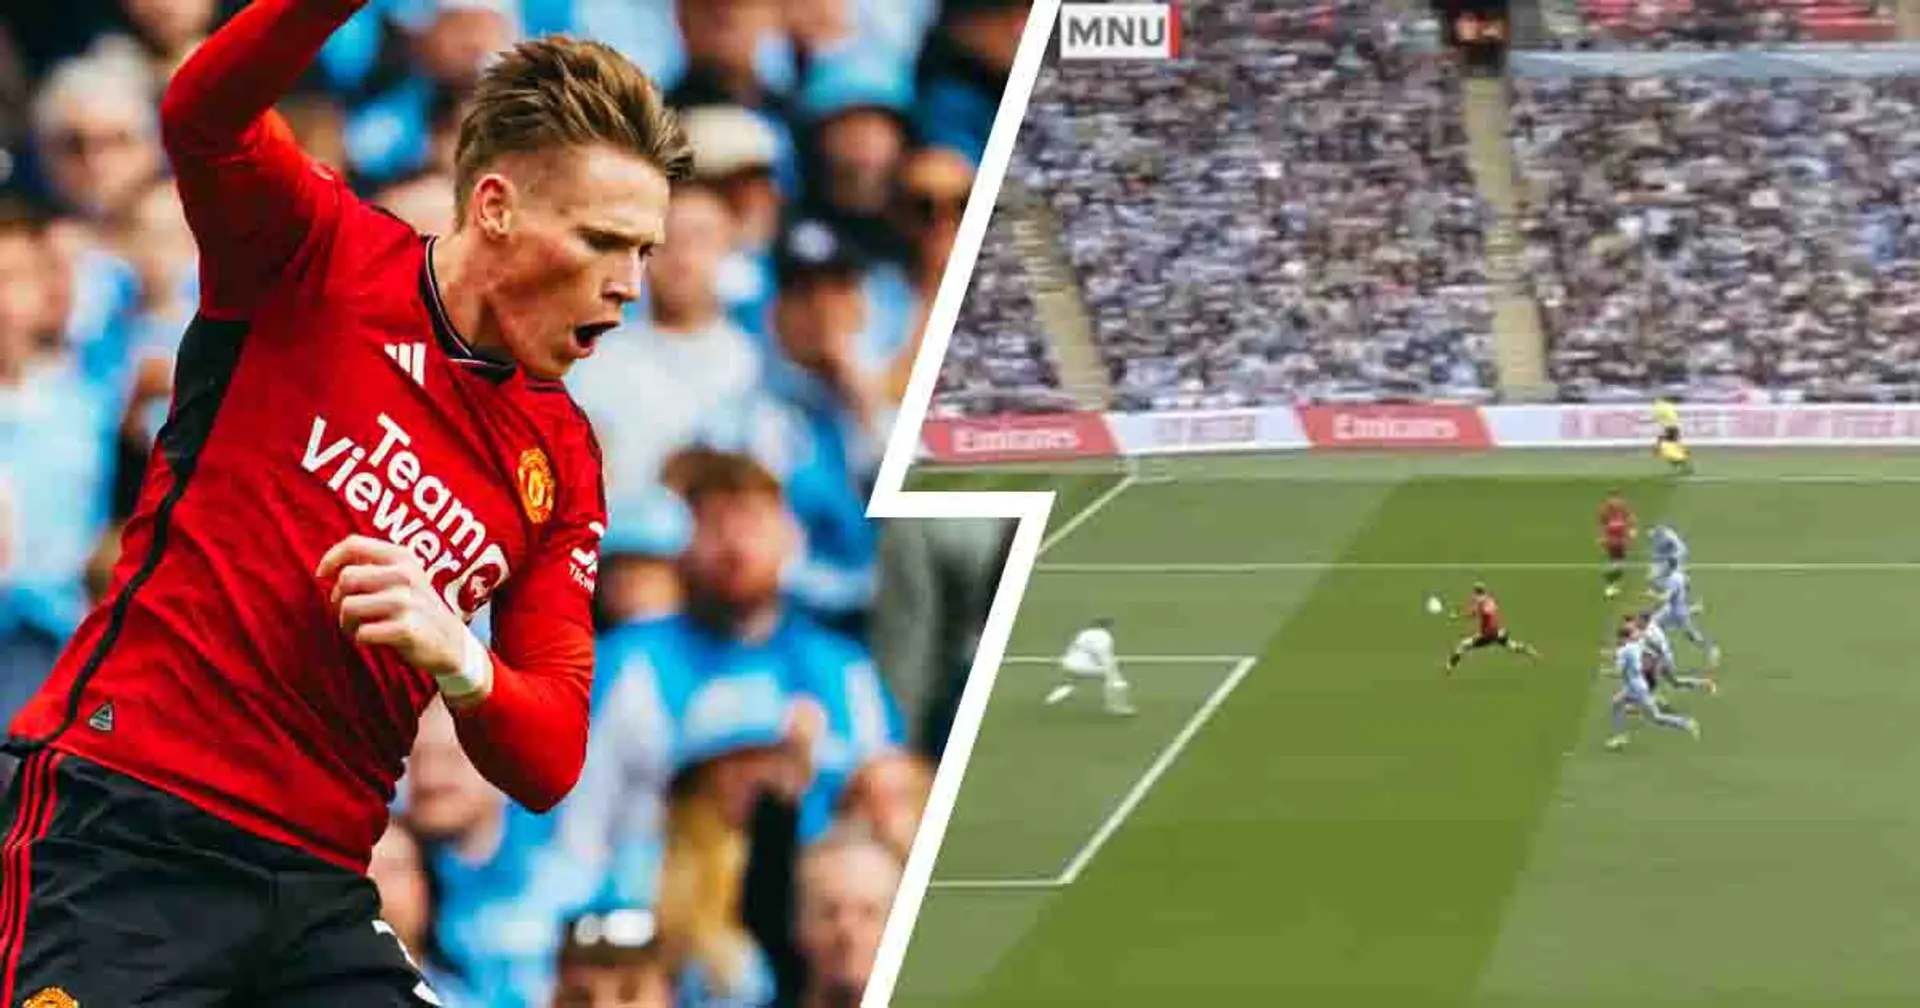 Four Man United players who impressed in first half vs Coventry...and two who must improve